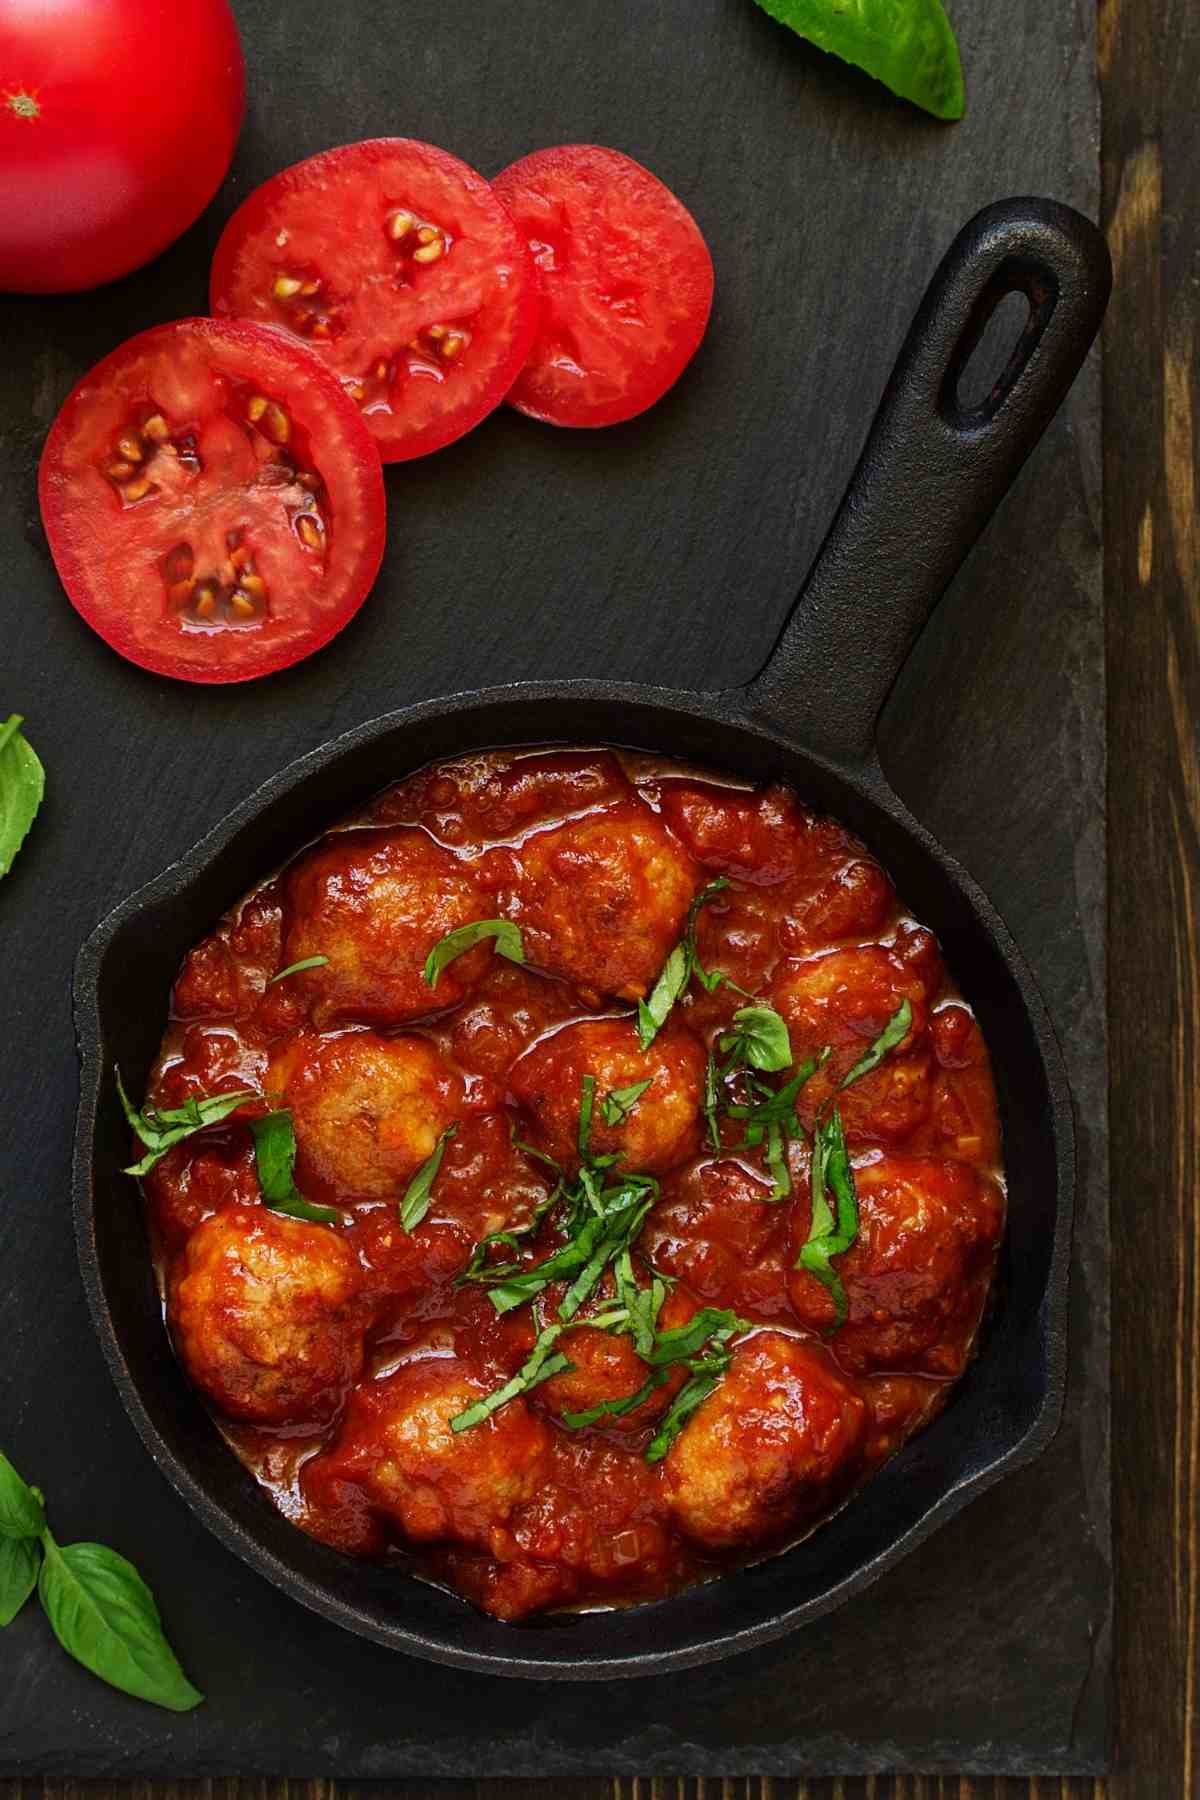 This homemade Beef Meatballs Recipe is ideal when served over pasta or in sandwiches! The meatballs are tender and juicy, and the tomato sauce is tangy and flavorful.